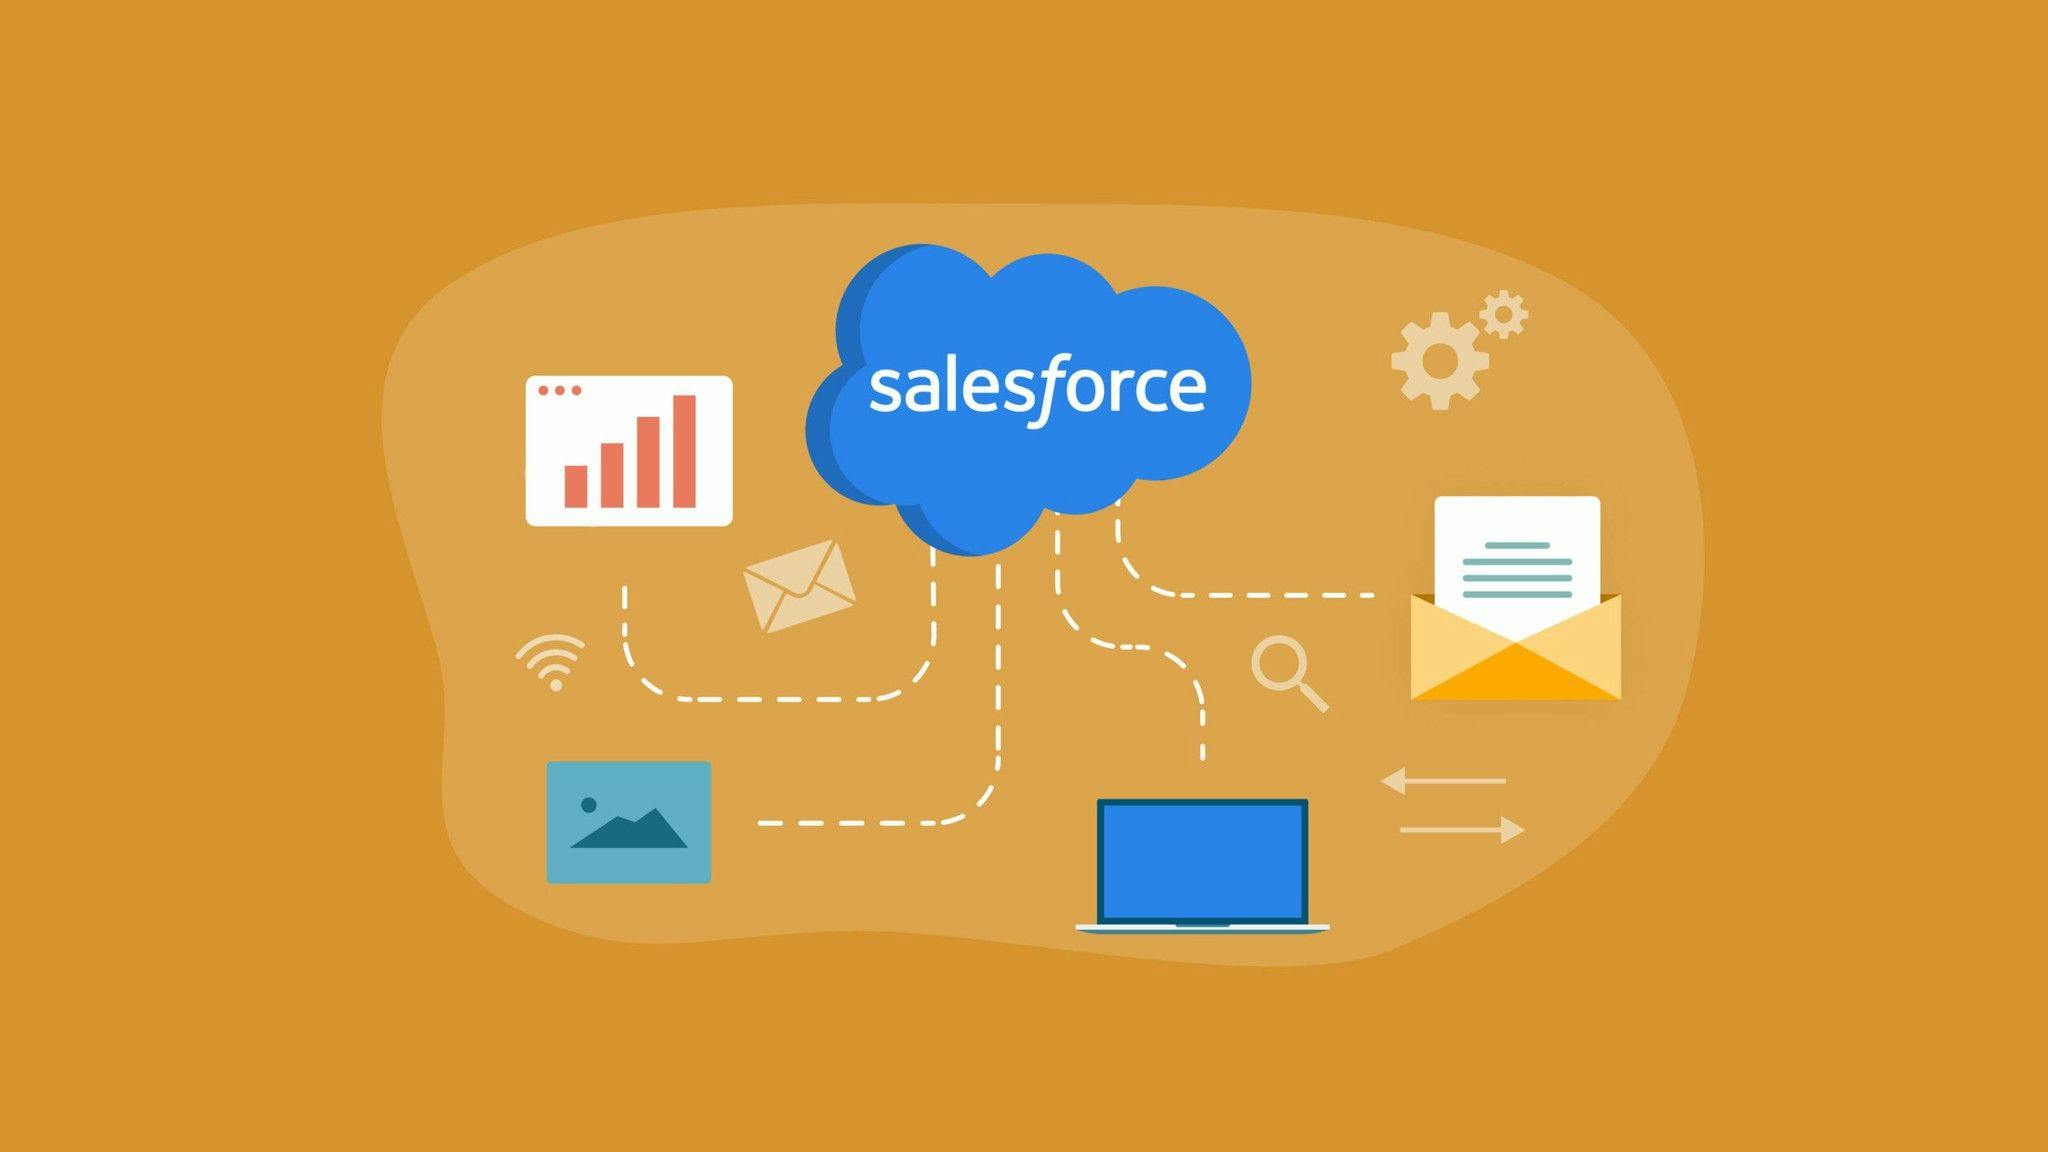 Kapsys-–-07-Feb-2-–-What-is-Salesforce_-What-Salesforce-is-Used-for-and-Its-Benefits-scaled.jpg